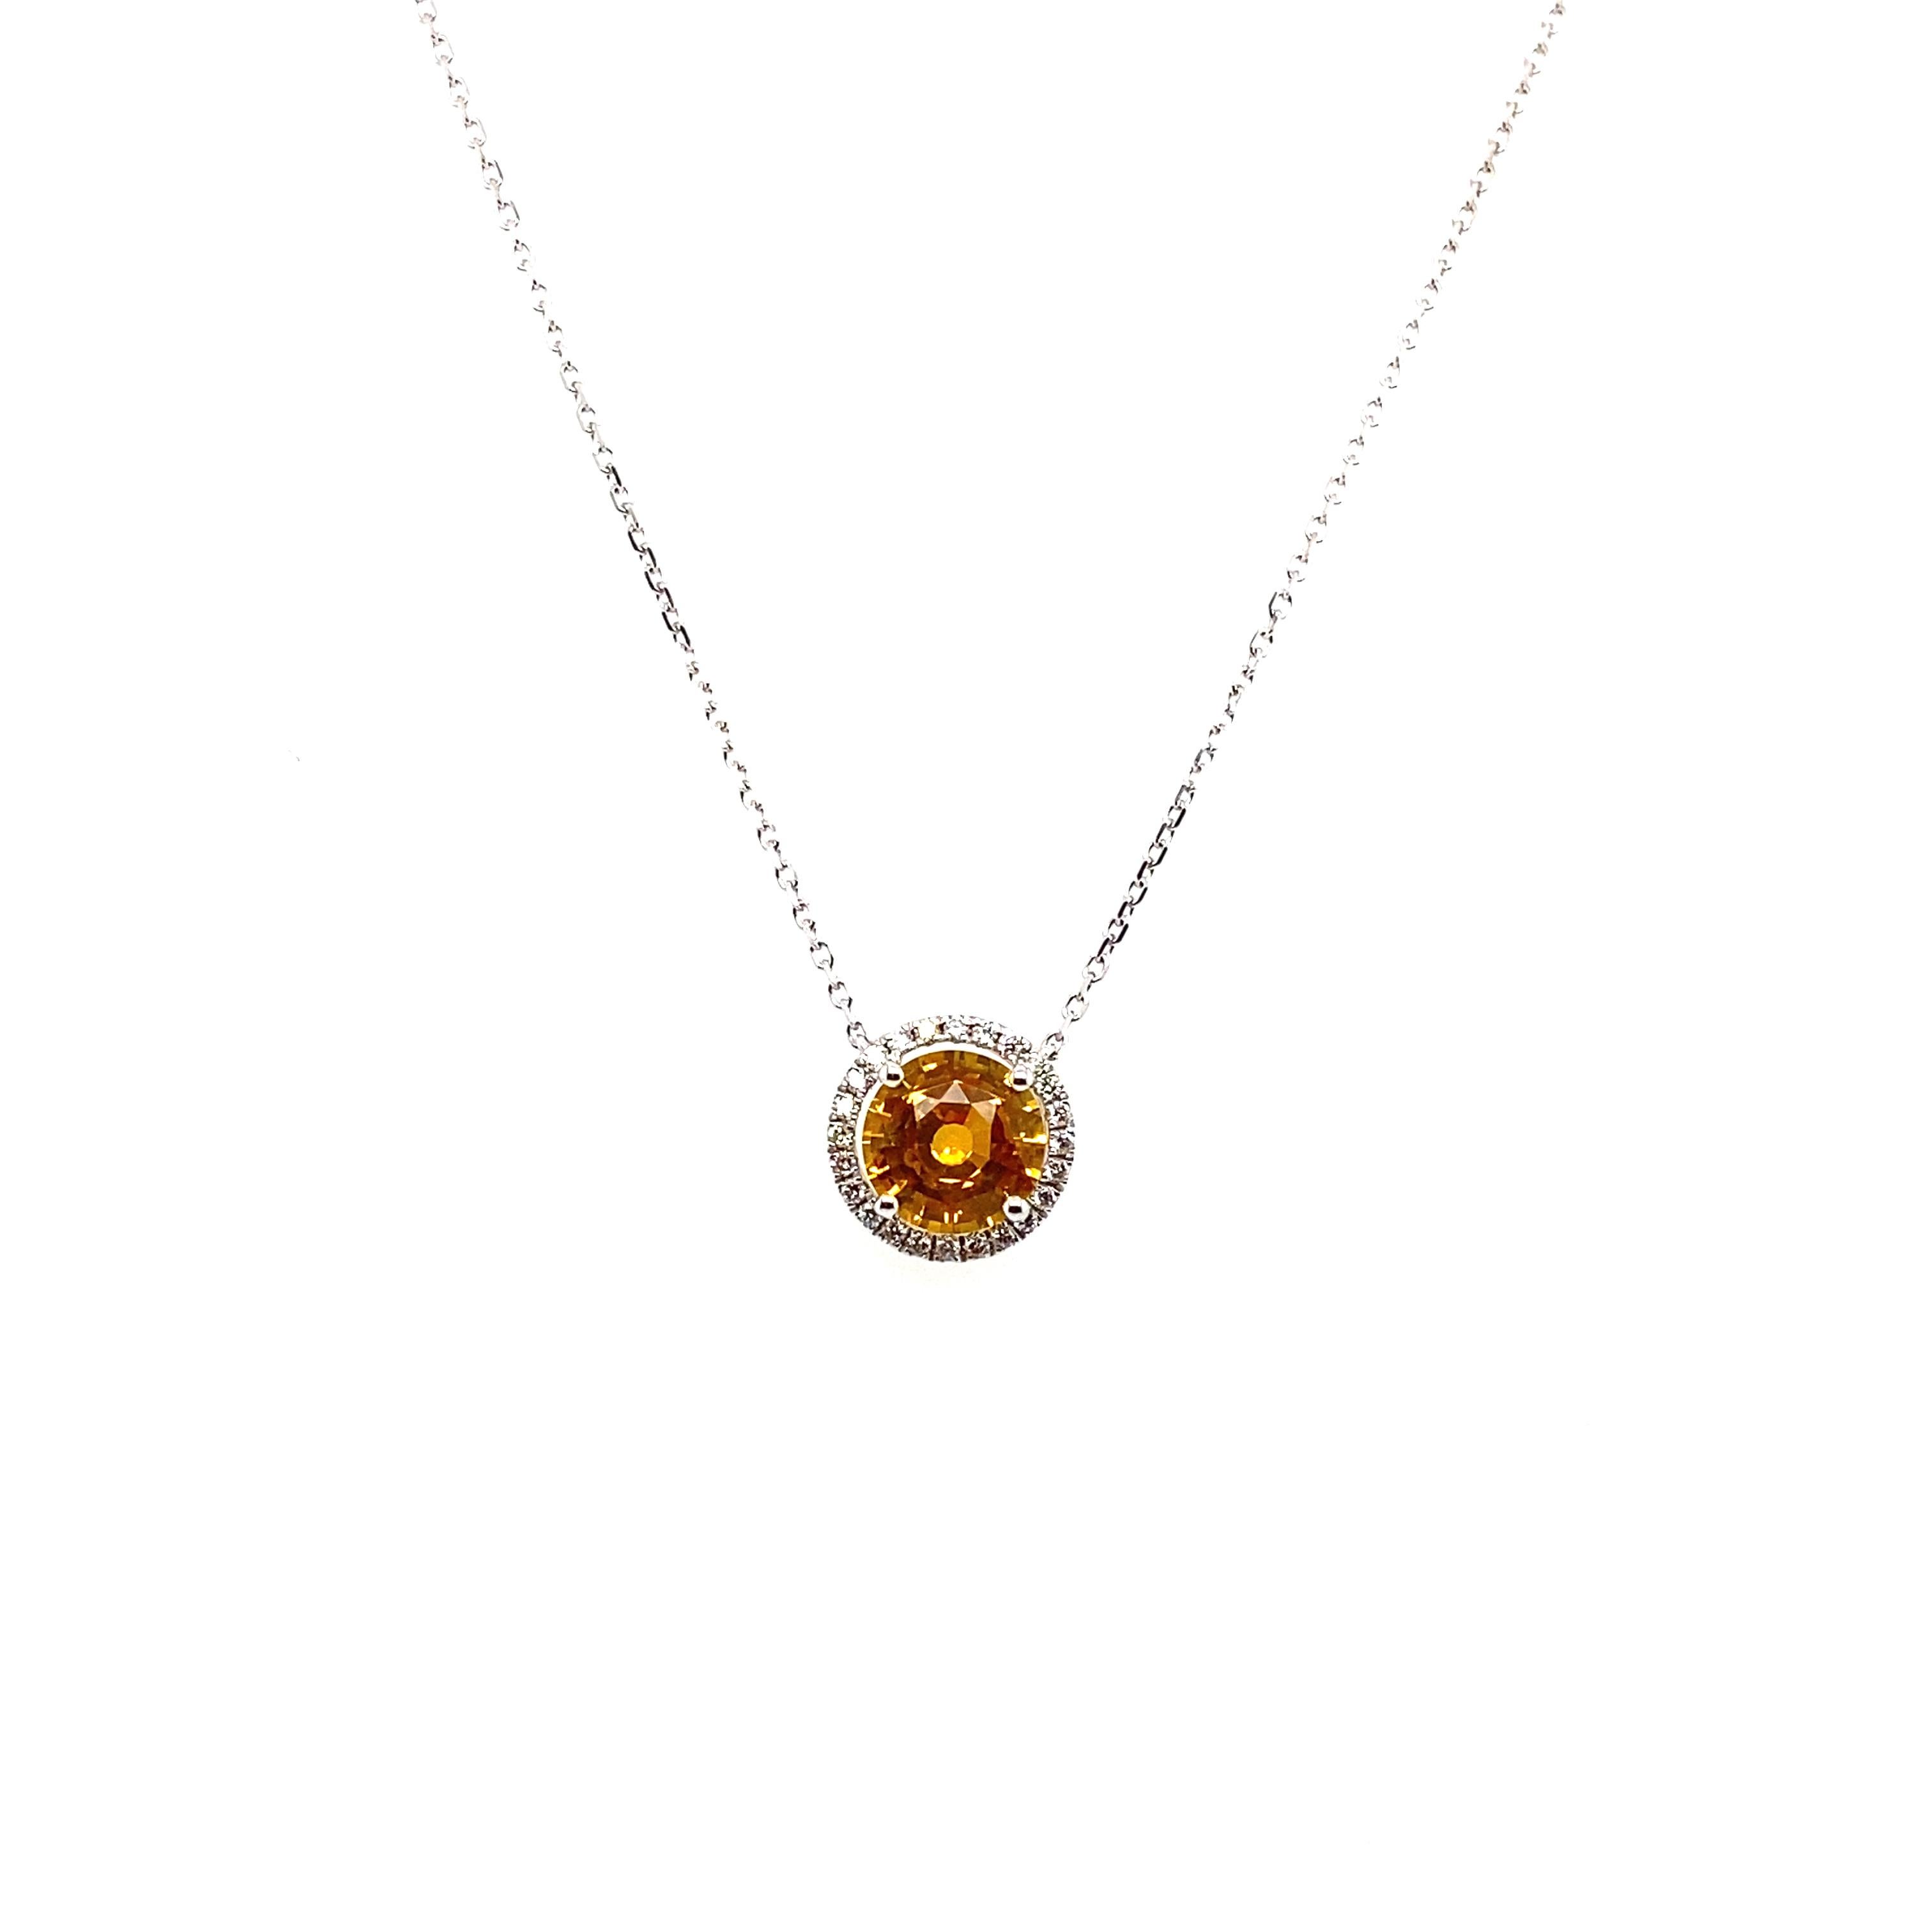 2.11 Carat Yellow Sapphire and Diamond Pendant Necklace For Sale 3